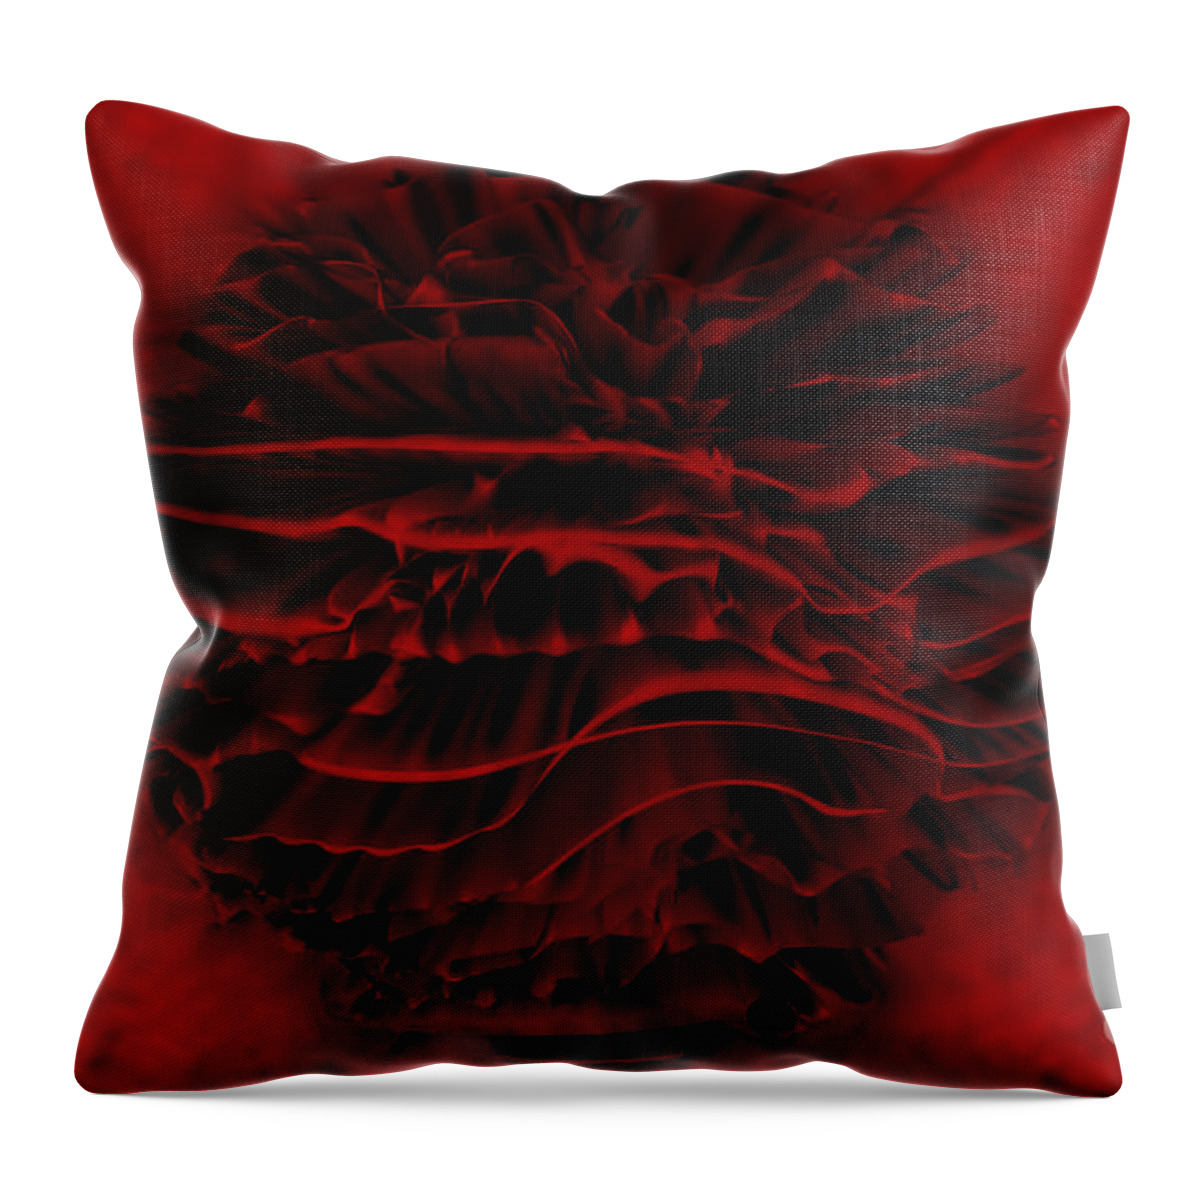 Red Throw Pillow featuring the digital art Red Blossom by Eric Nagel